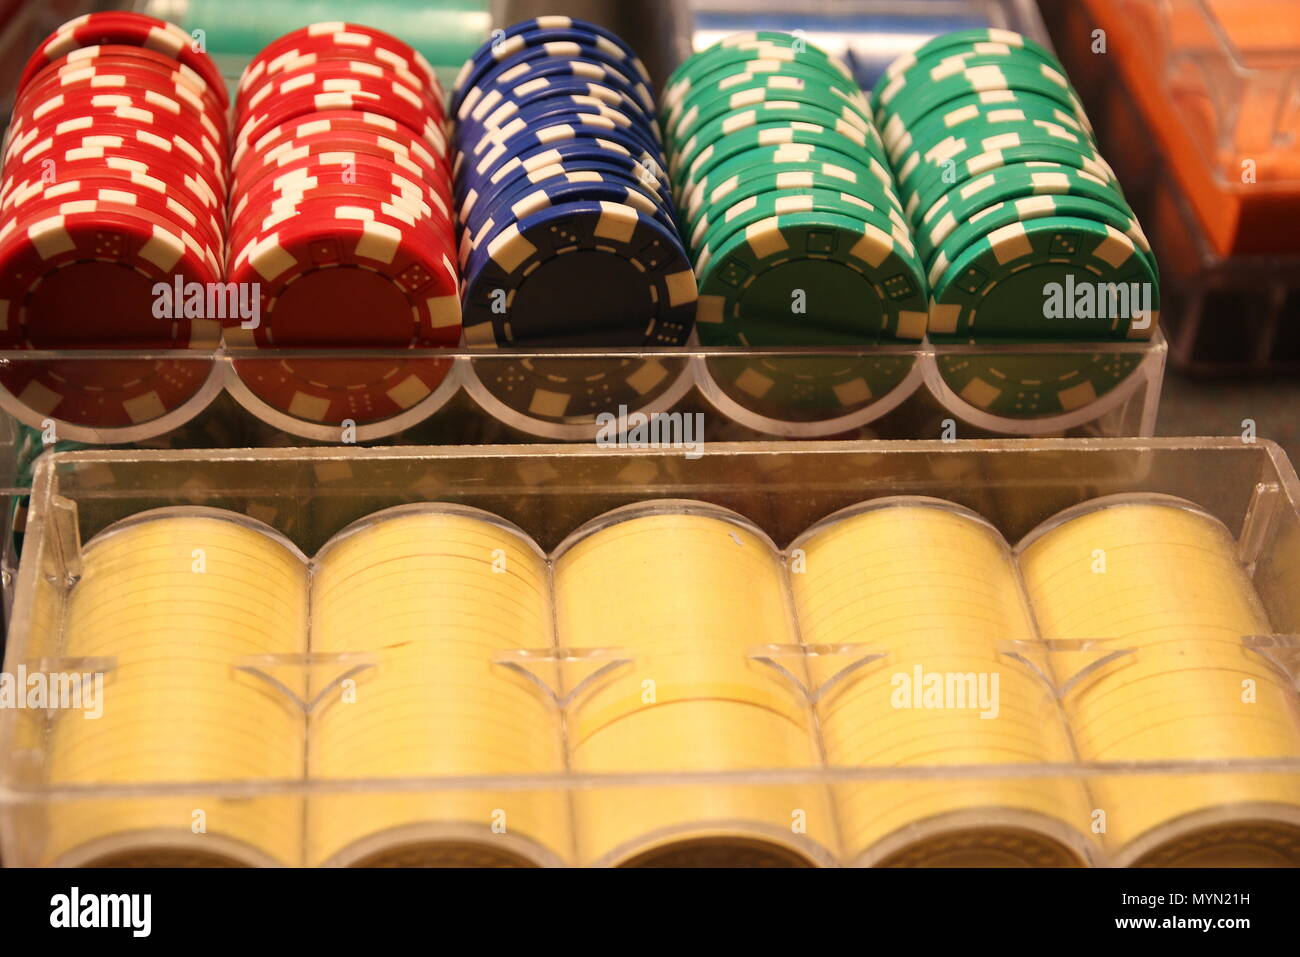 Calling all gamblers: roulette wheel, caps table, and poker chips. Stock Photo